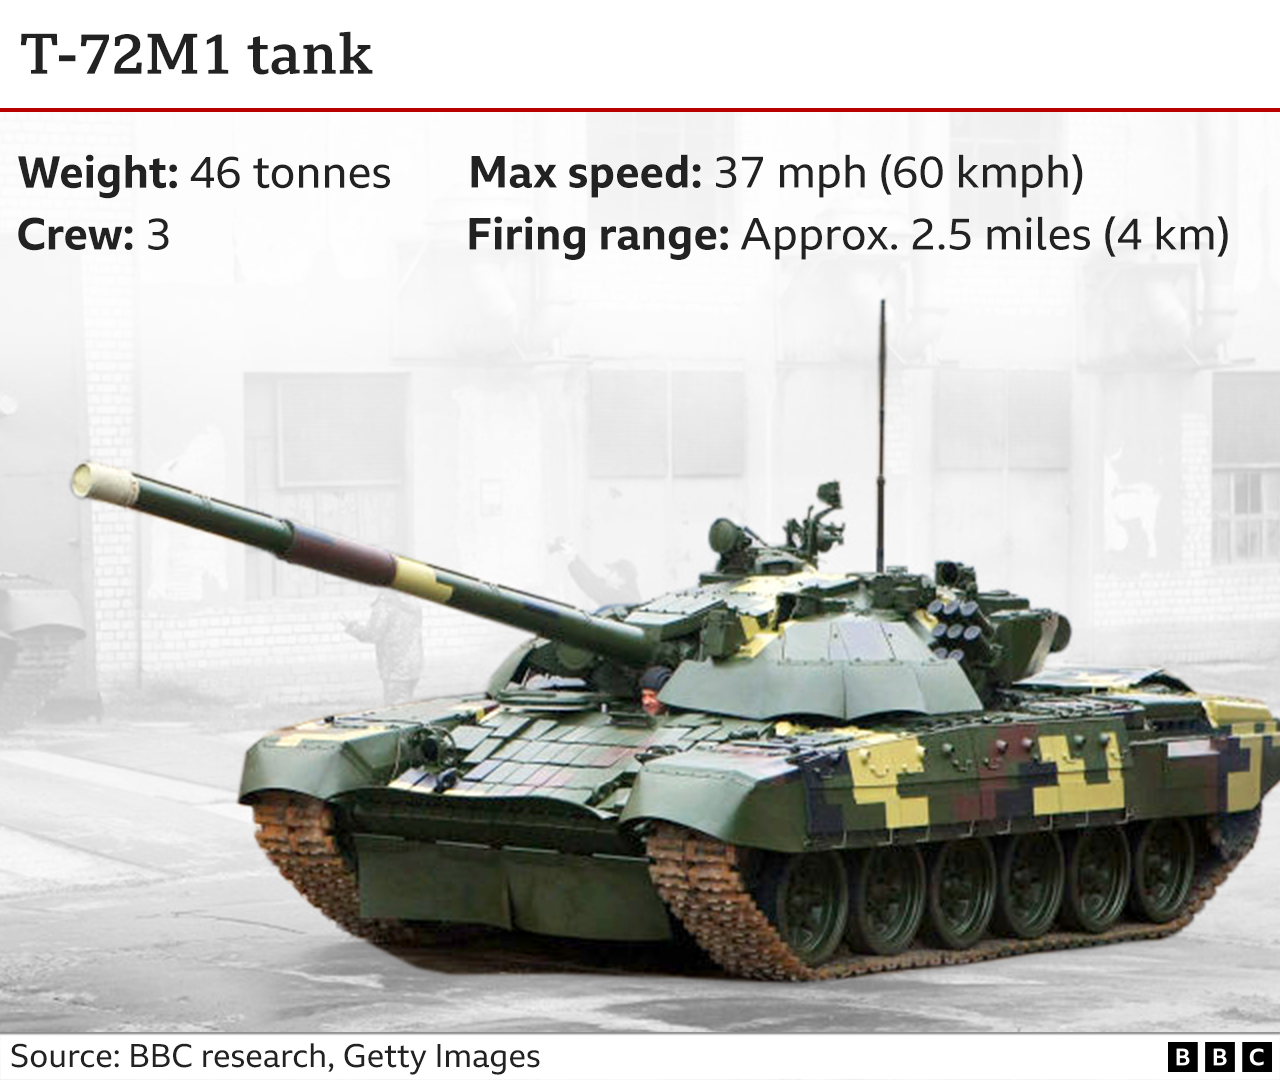 Graphic showing details of T-72 tank.